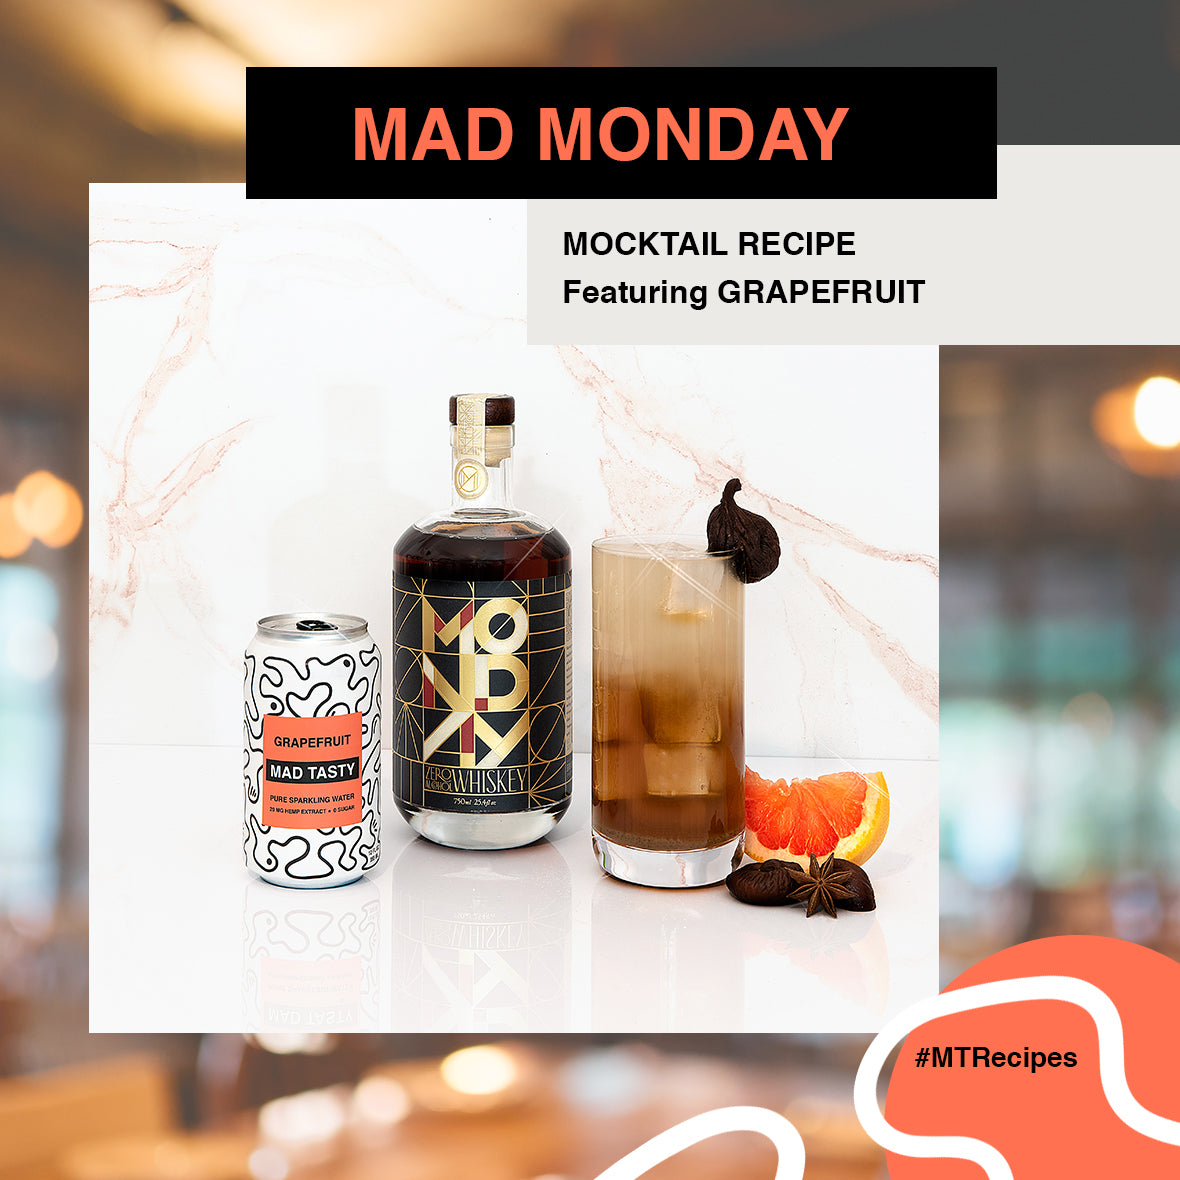 Picture of Monday zero-proof whisky, MAD TASTY Grapefruit, a glass with the mocktail in it and an orange.